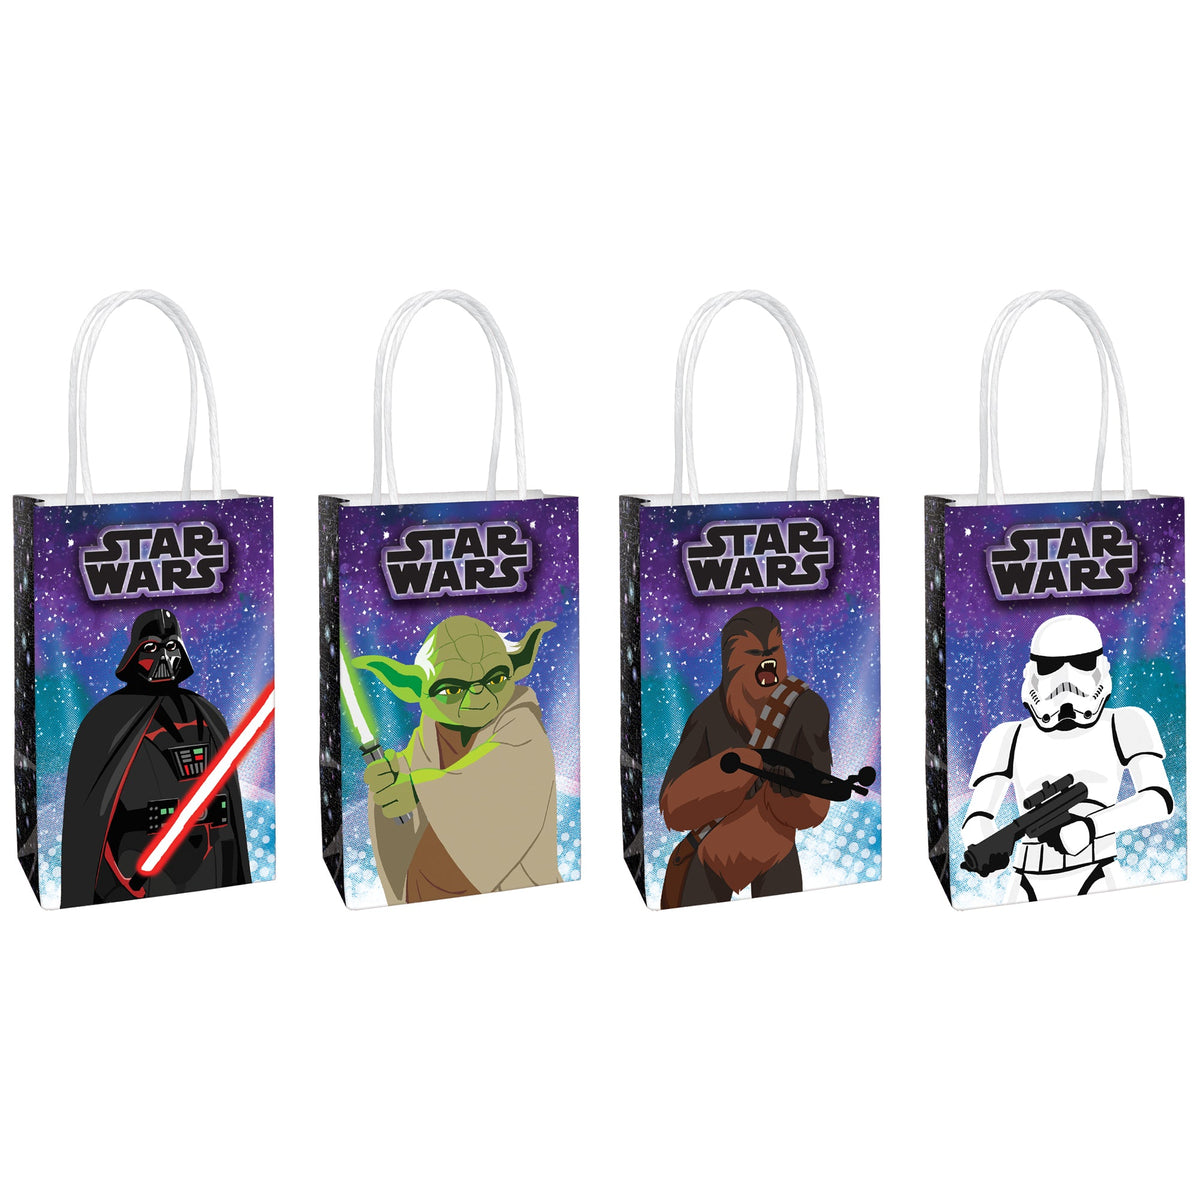 Star Wars Galaxy of Adventures Create Your Own Bags 8 1/2" x 5 1/4" x 3"